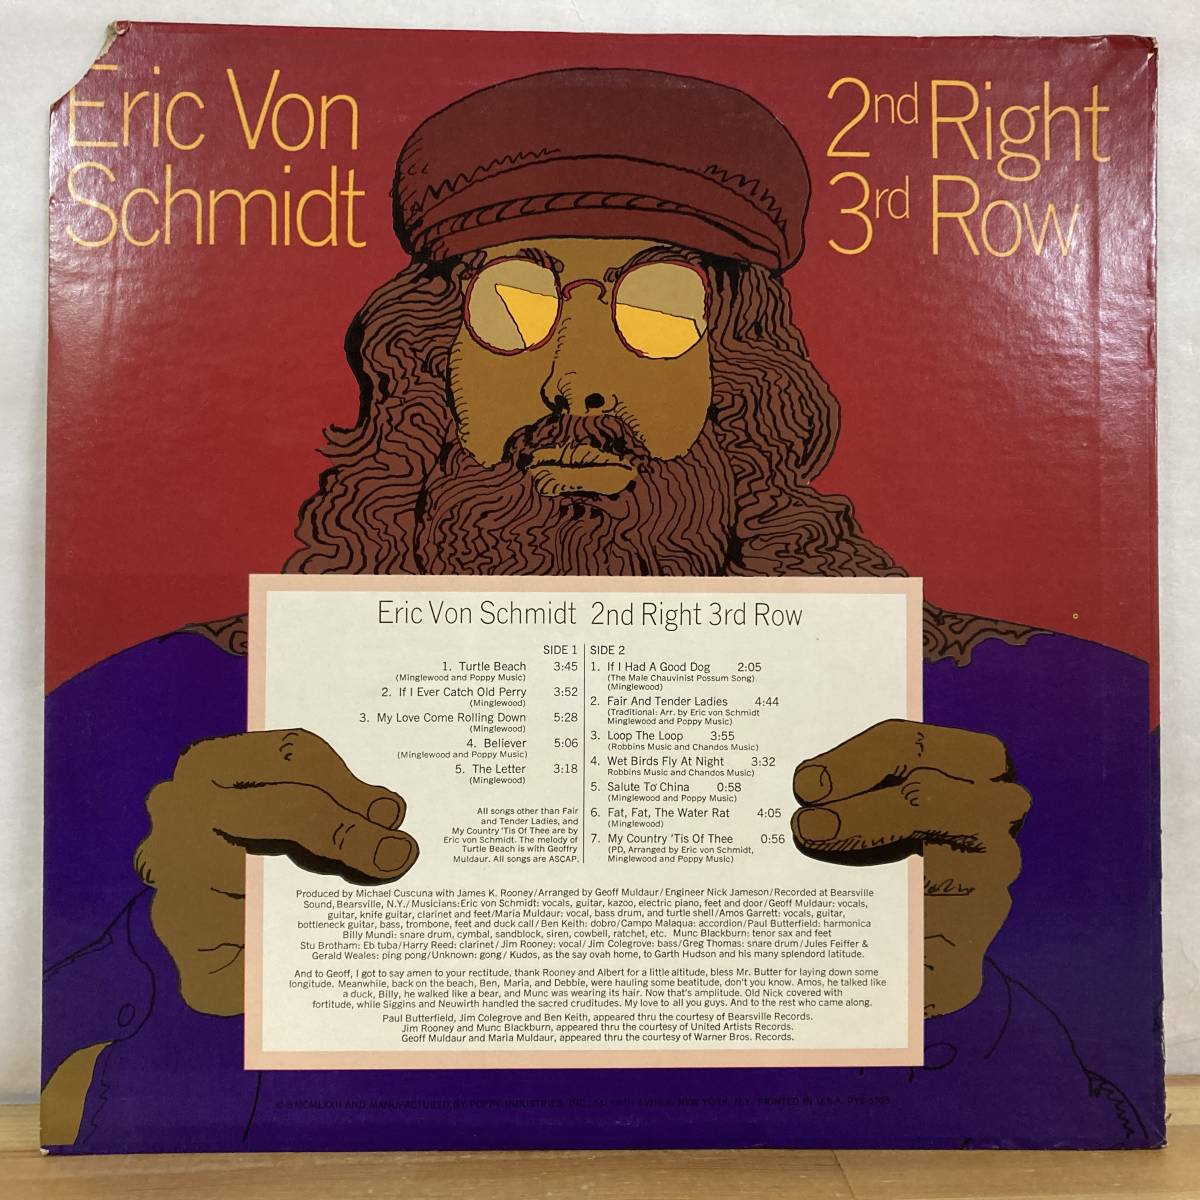 X7■【US盤/LP】Eric Von Schmidt エリック・フォン・シュミット / 2nd Right 3rd Row ● Poppy / PYS-5705 / USフォーク 231023_画像2